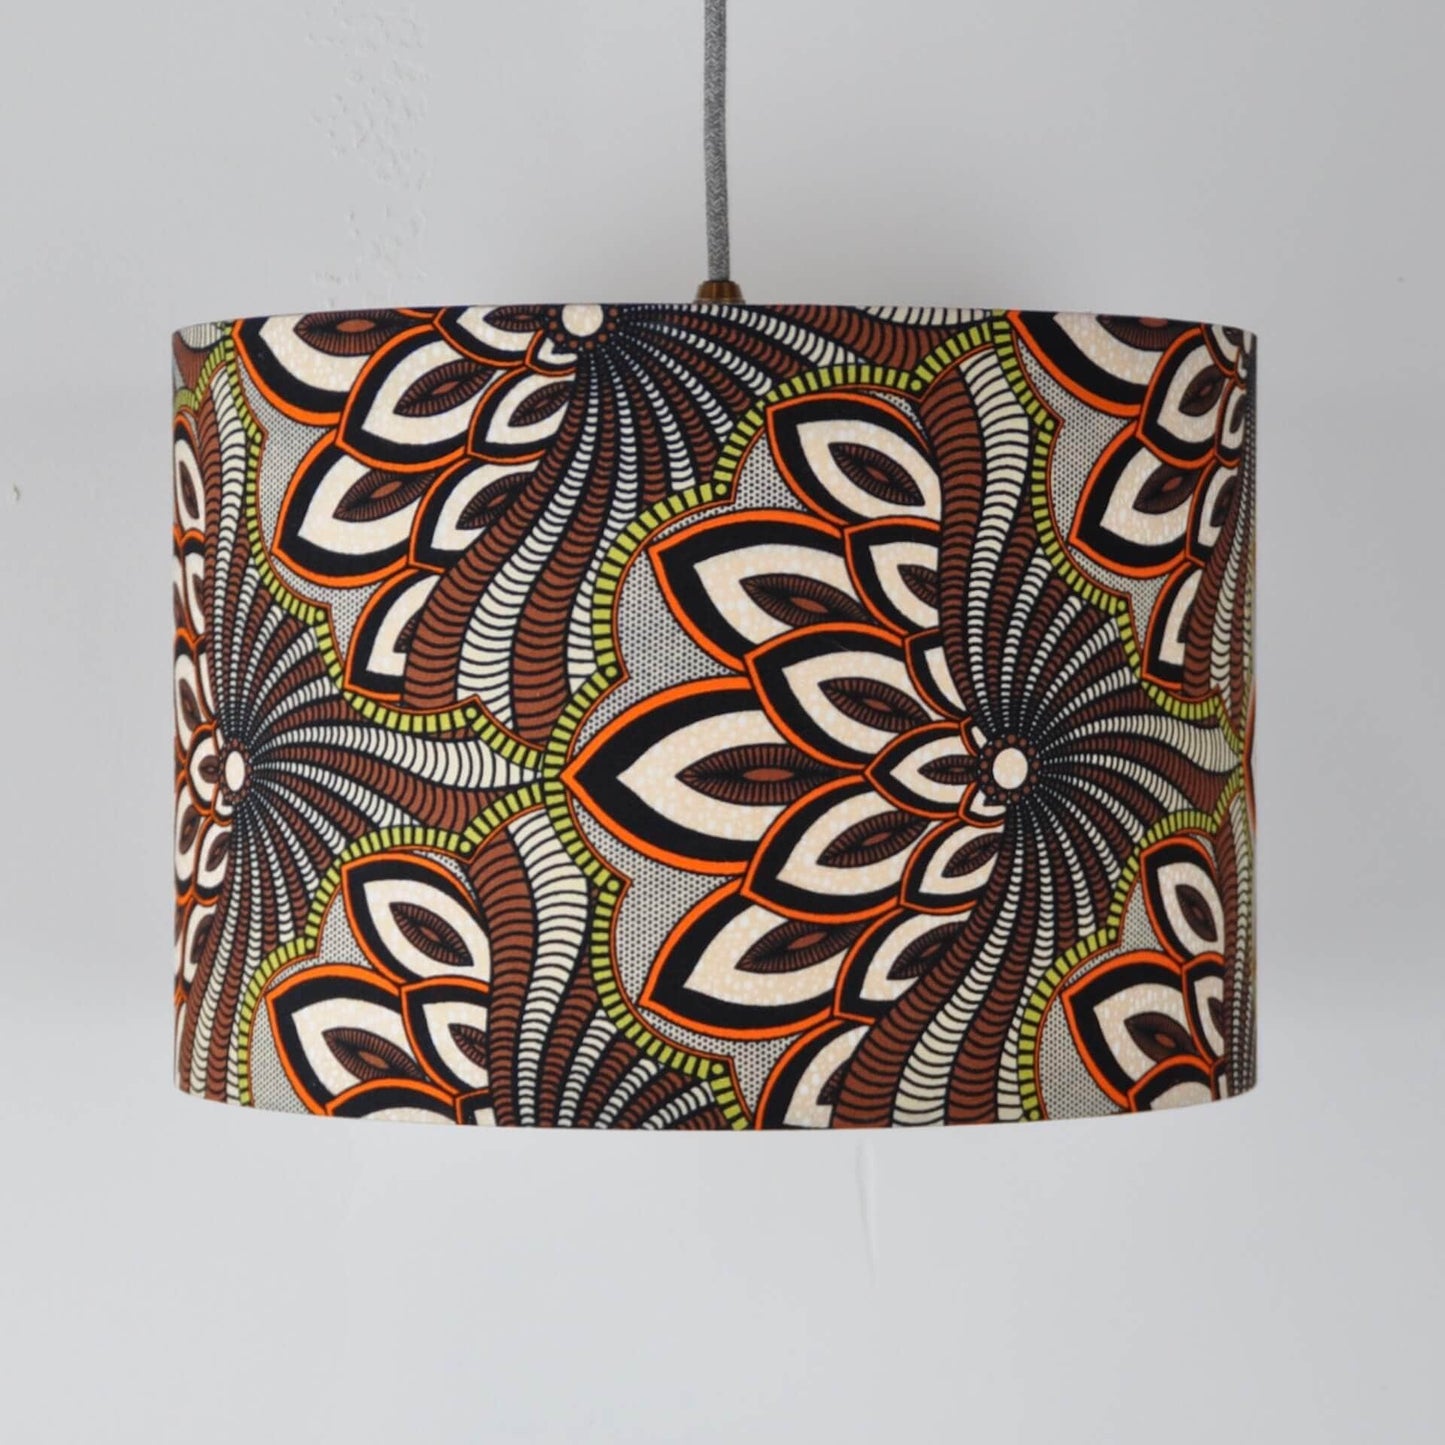 Colourful Shadez Bristol ⌀ 35cm x H24cm African Print Lampshade - Brown Peacock Feather (various sizes)